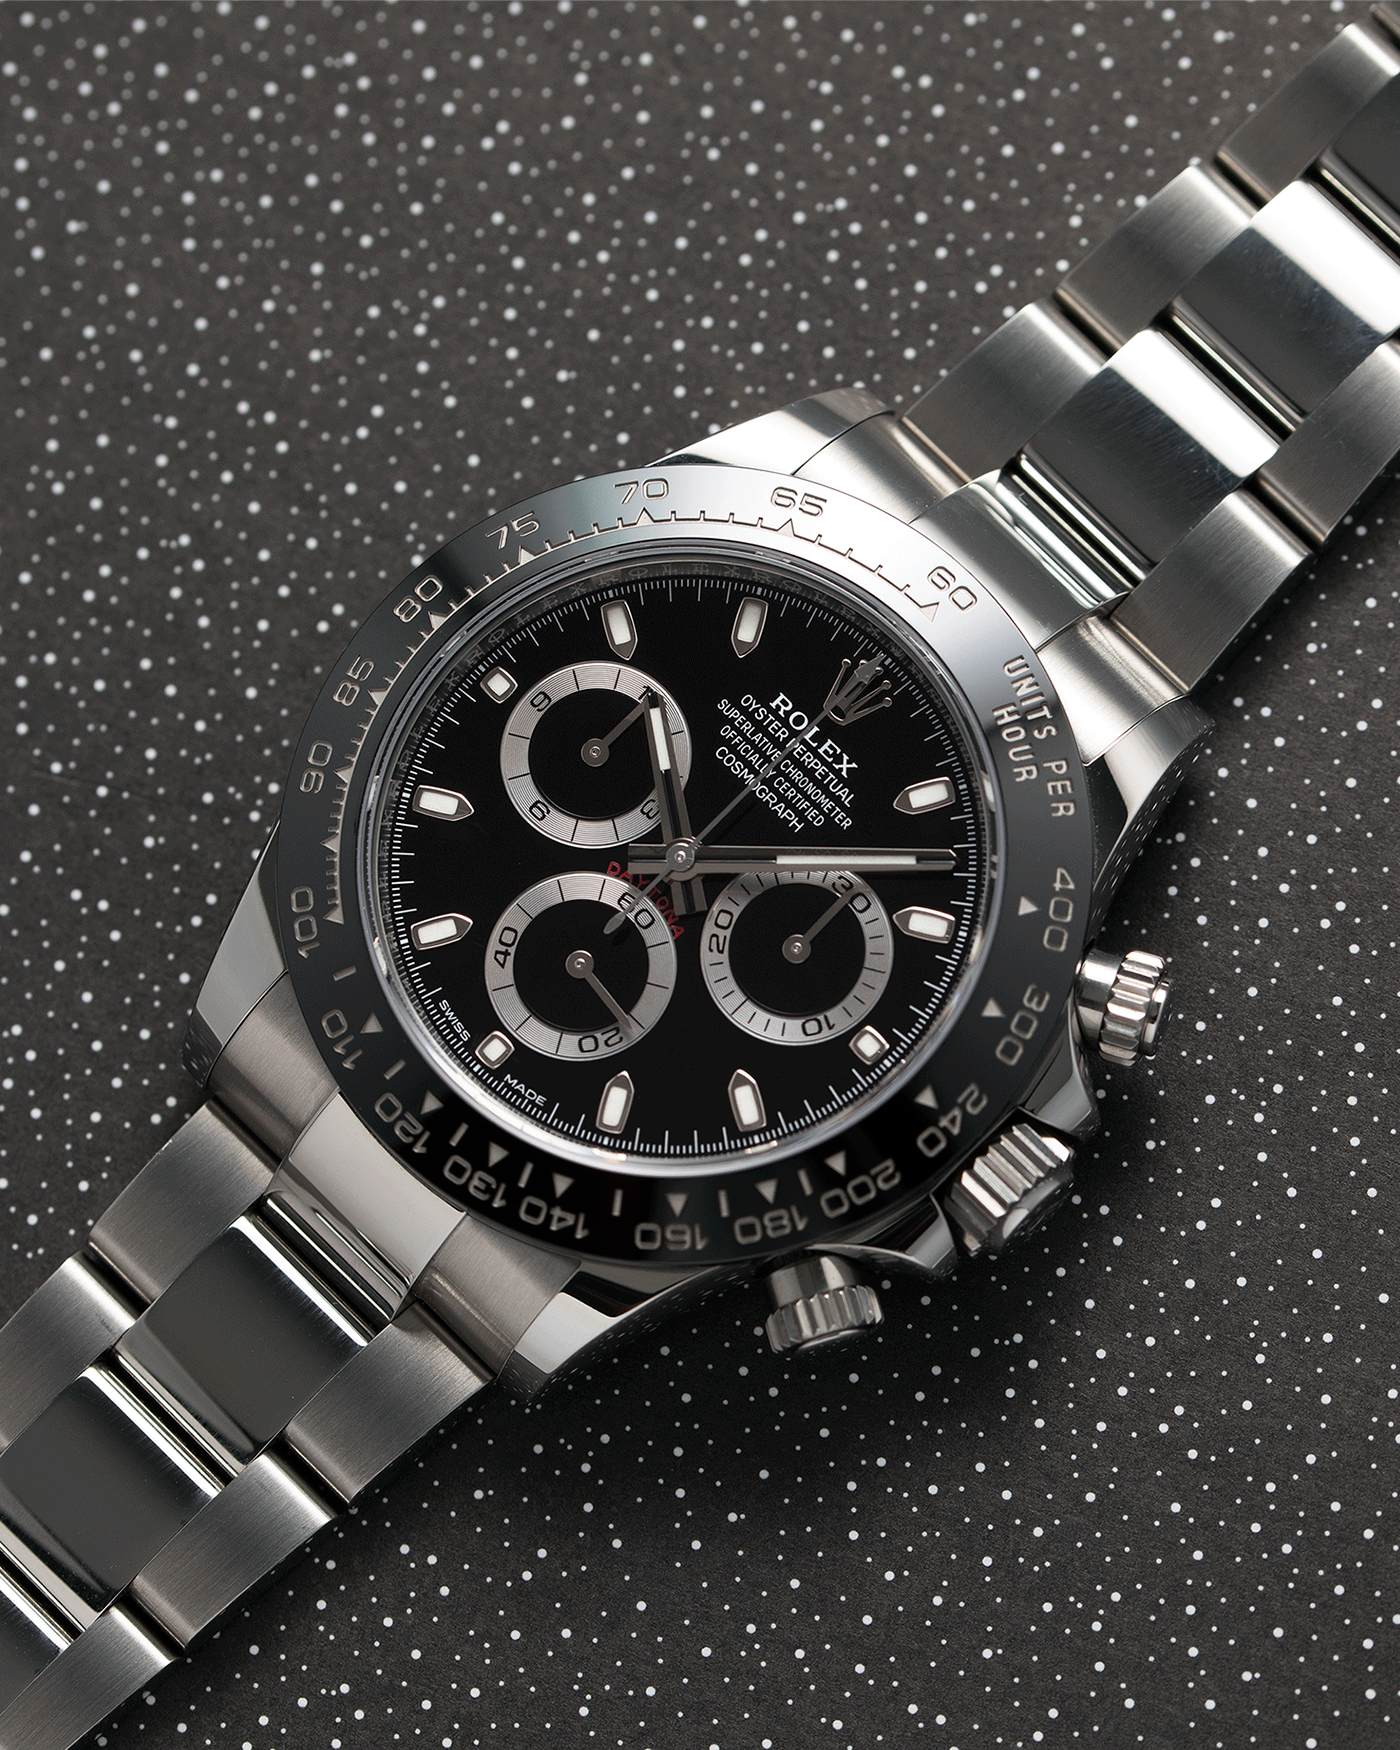 Brand: Rolex Year: 2019 Model: Daytona Reference: 116500 Material: Stainless Steel Movement: Calibre 4130 Case Diameter: 40mm Strap: Stainless Steel Rolex Oyster Bracelet